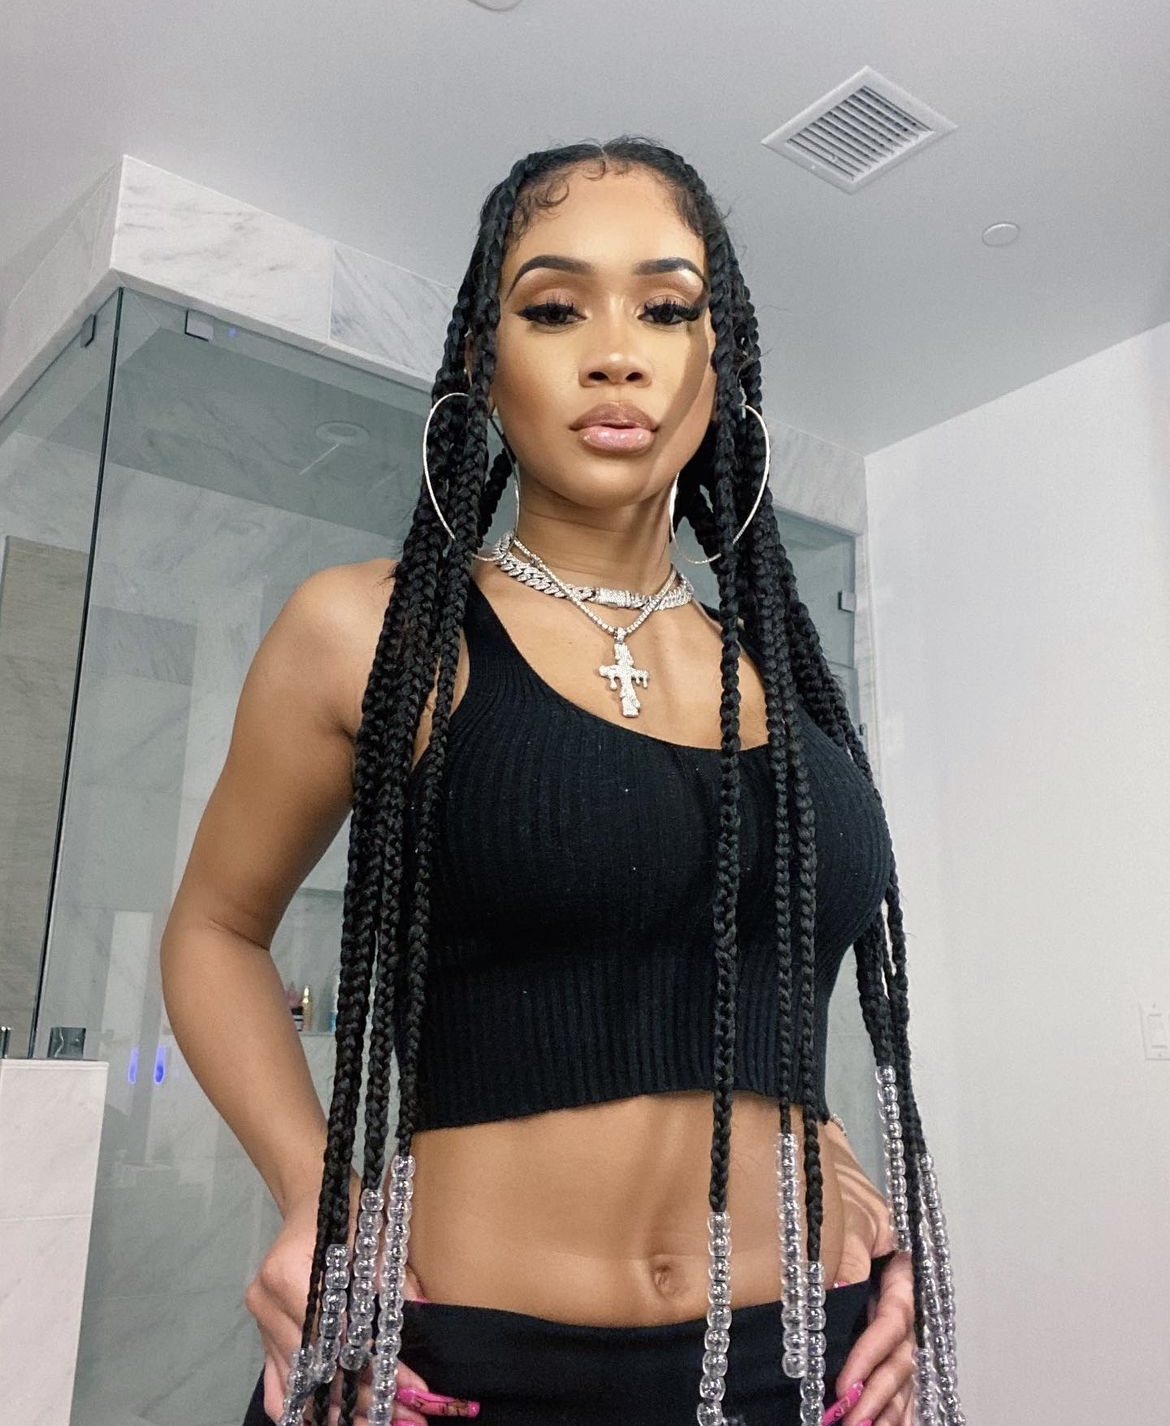 Saweetie Calls Out Warner Bros Records, Asks Them To Approve The Budget For Her Long-Awaited Debut Album